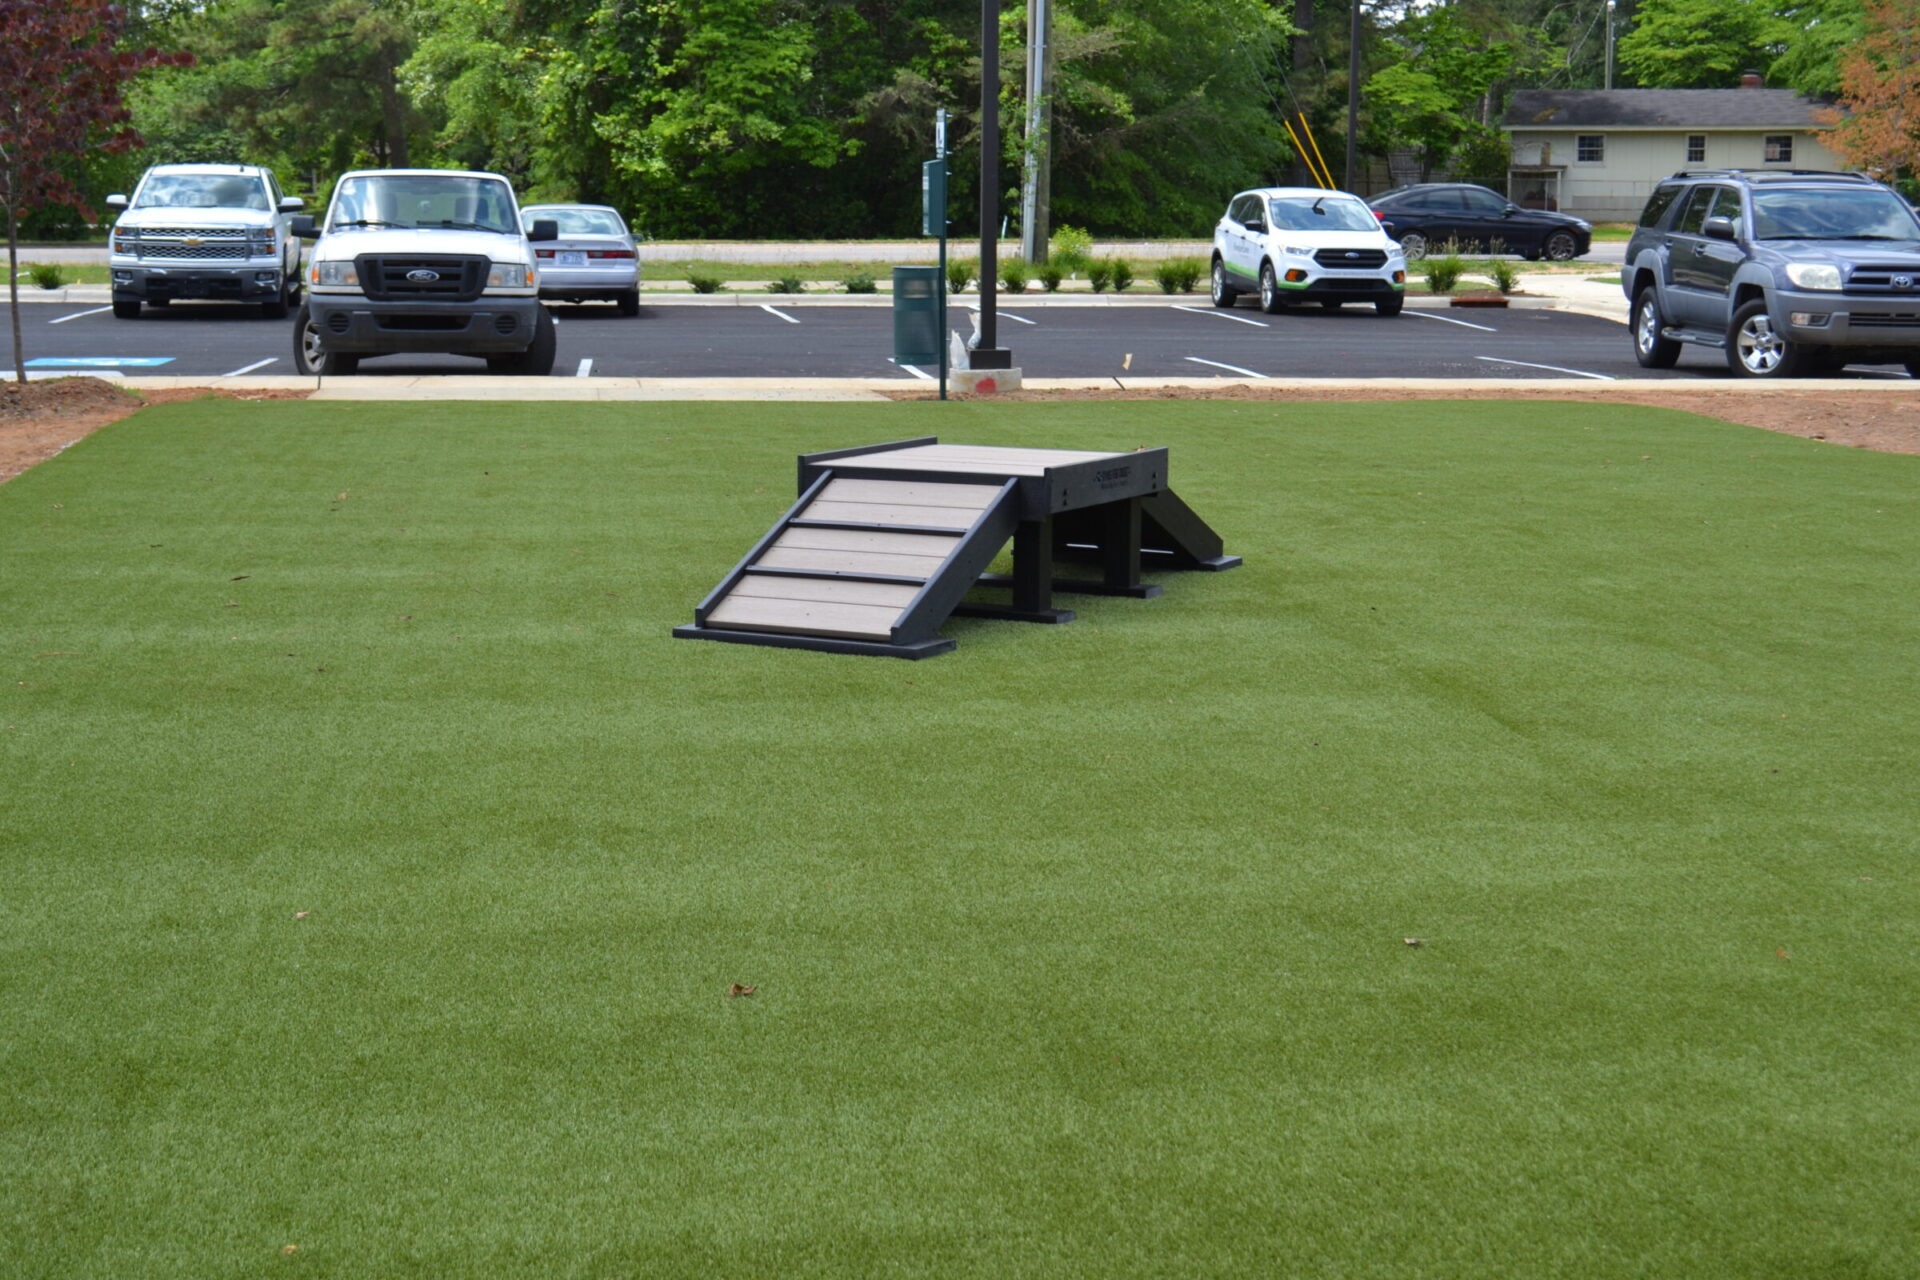 An agility ramp for dogs is on artificial grass with parked vehicles in the background and trees and a road further behind.